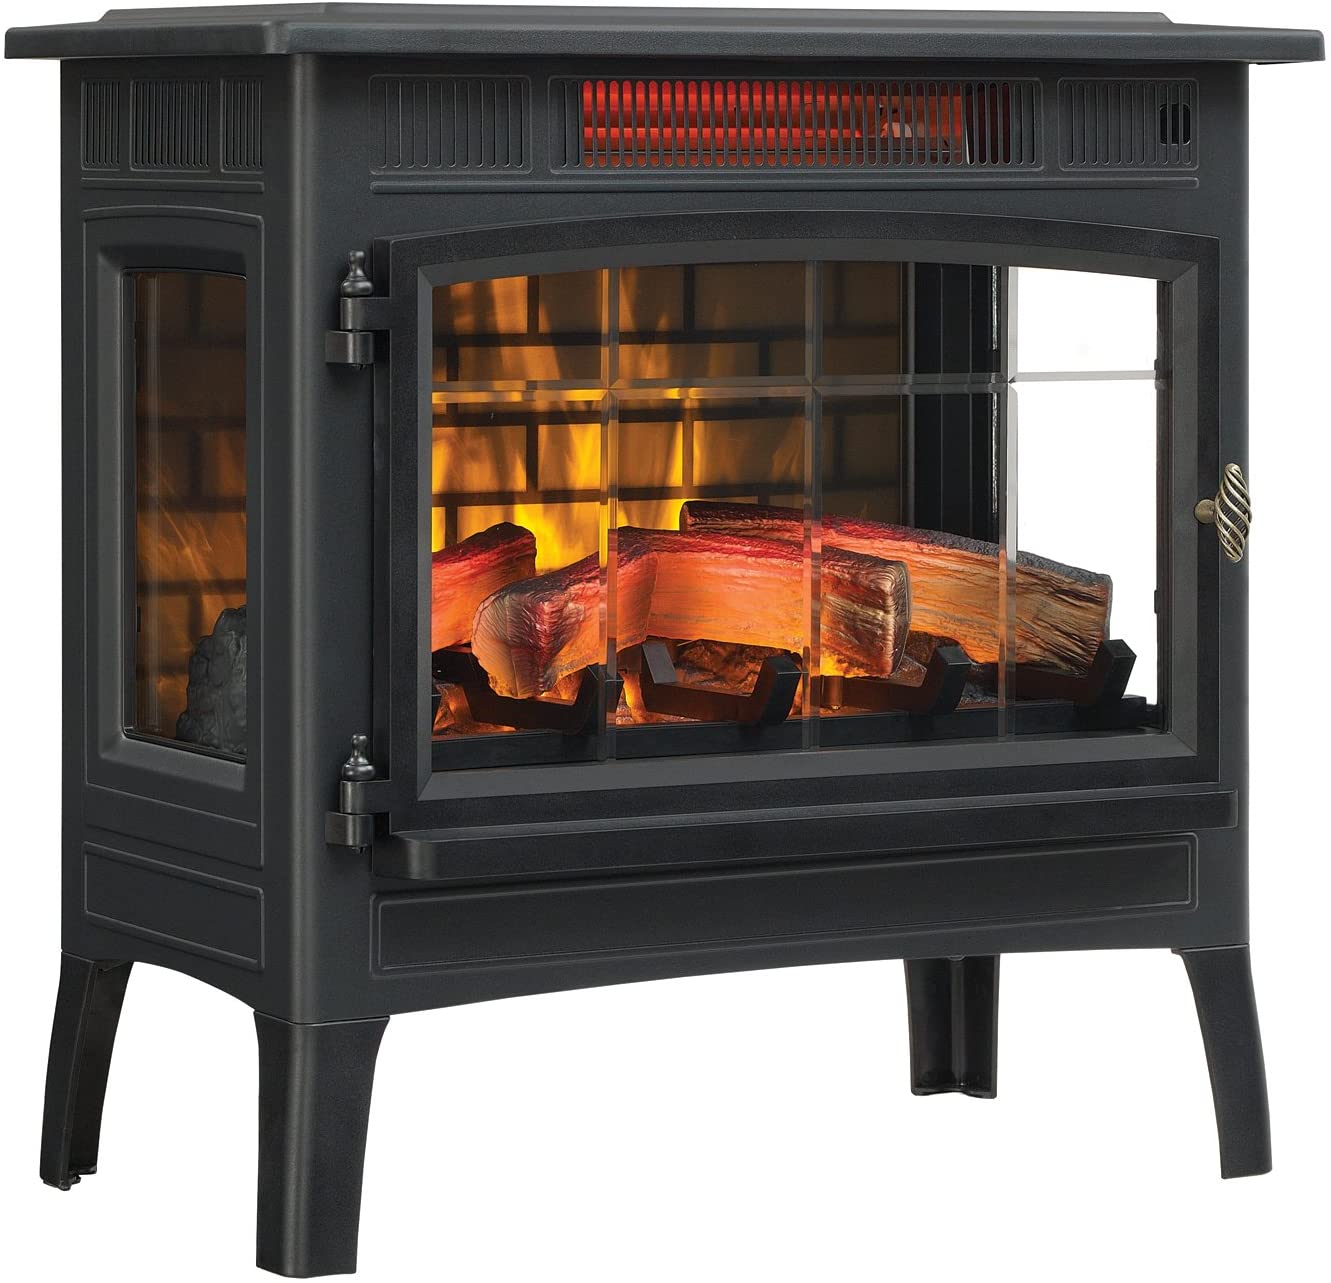 Duraflame-3D-Infrared-Electric-Fireplace-Stove